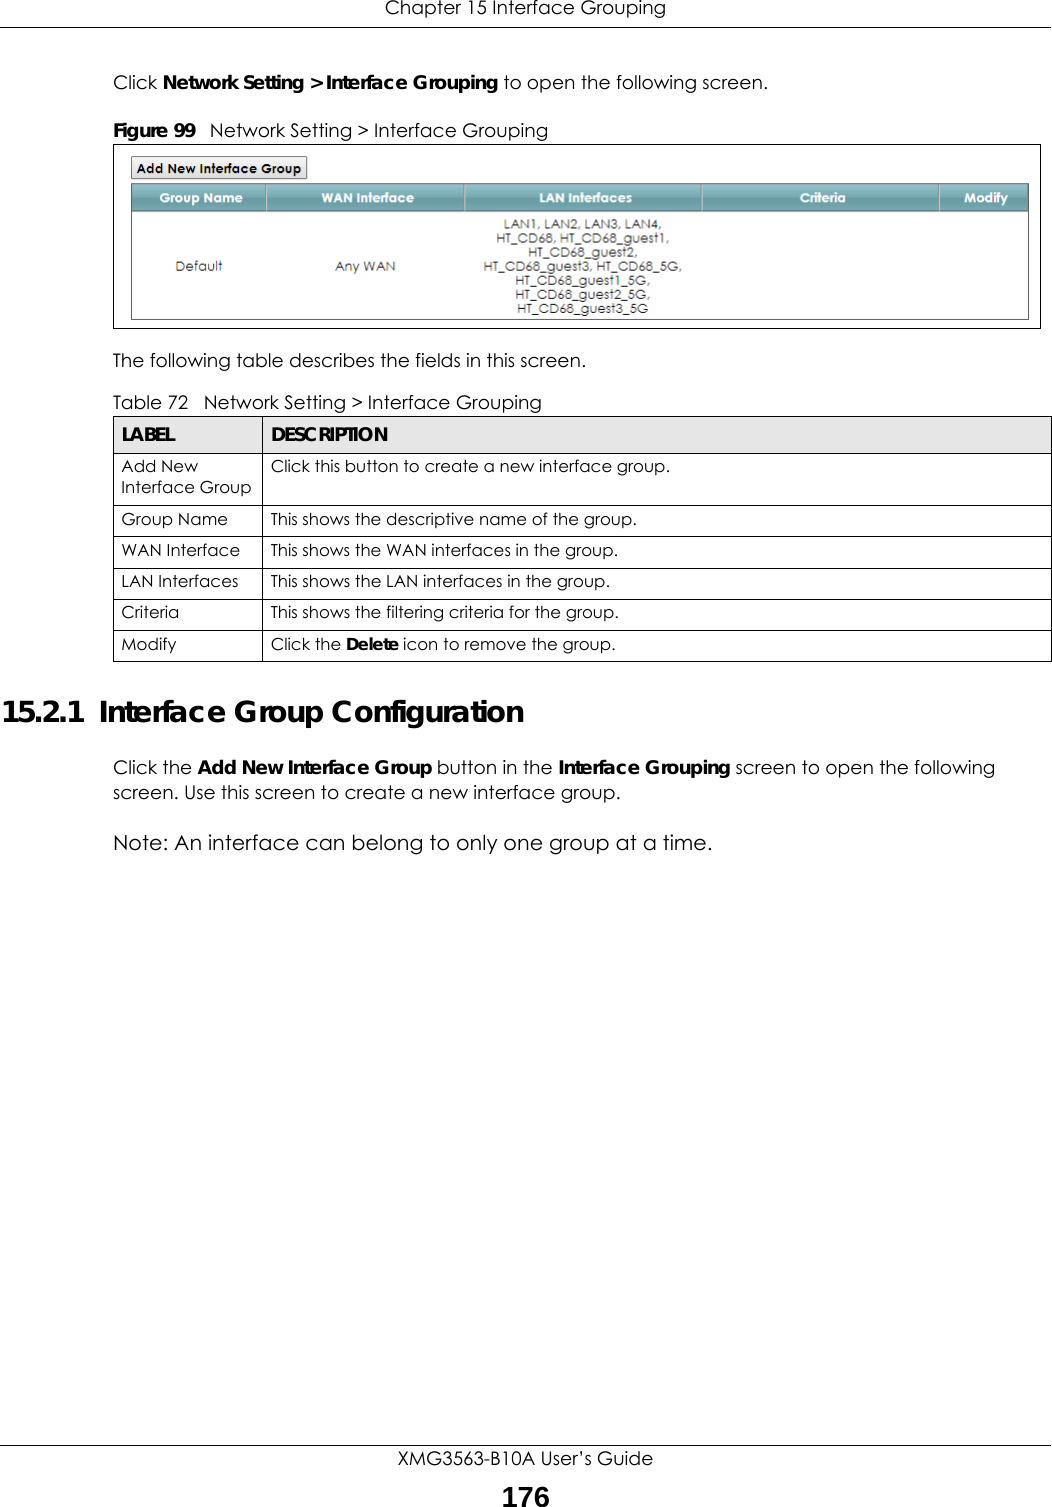 Chapter 15 Interface GroupingXMG3563-B10A User’s Guide176Click Network Setting &gt; Interface Grouping to open the following screen. Figure 99   Network Setting &gt; Interface Grouping The following table describes the fields in this screen. 15.2.1  Interface Group ConfigurationClick the Add New Interface Group button in the Interface Grouping screen to open the following screen. Use this screen to create a new interface group. Note: An interface can belong to only one group at a time.Table 72   Network Setting &gt; Interface GroupingLABEL DESCRIPTIONAdd New Interface GroupClick this button to create a new interface group.Group Name This shows the descriptive name of the group.WAN Interface This shows the WAN interfaces in the group.LAN Interfaces This shows the LAN interfaces in the group.Criteria This shows the filtering criteria for the group.Modify Click the Delete icon to remove the group.